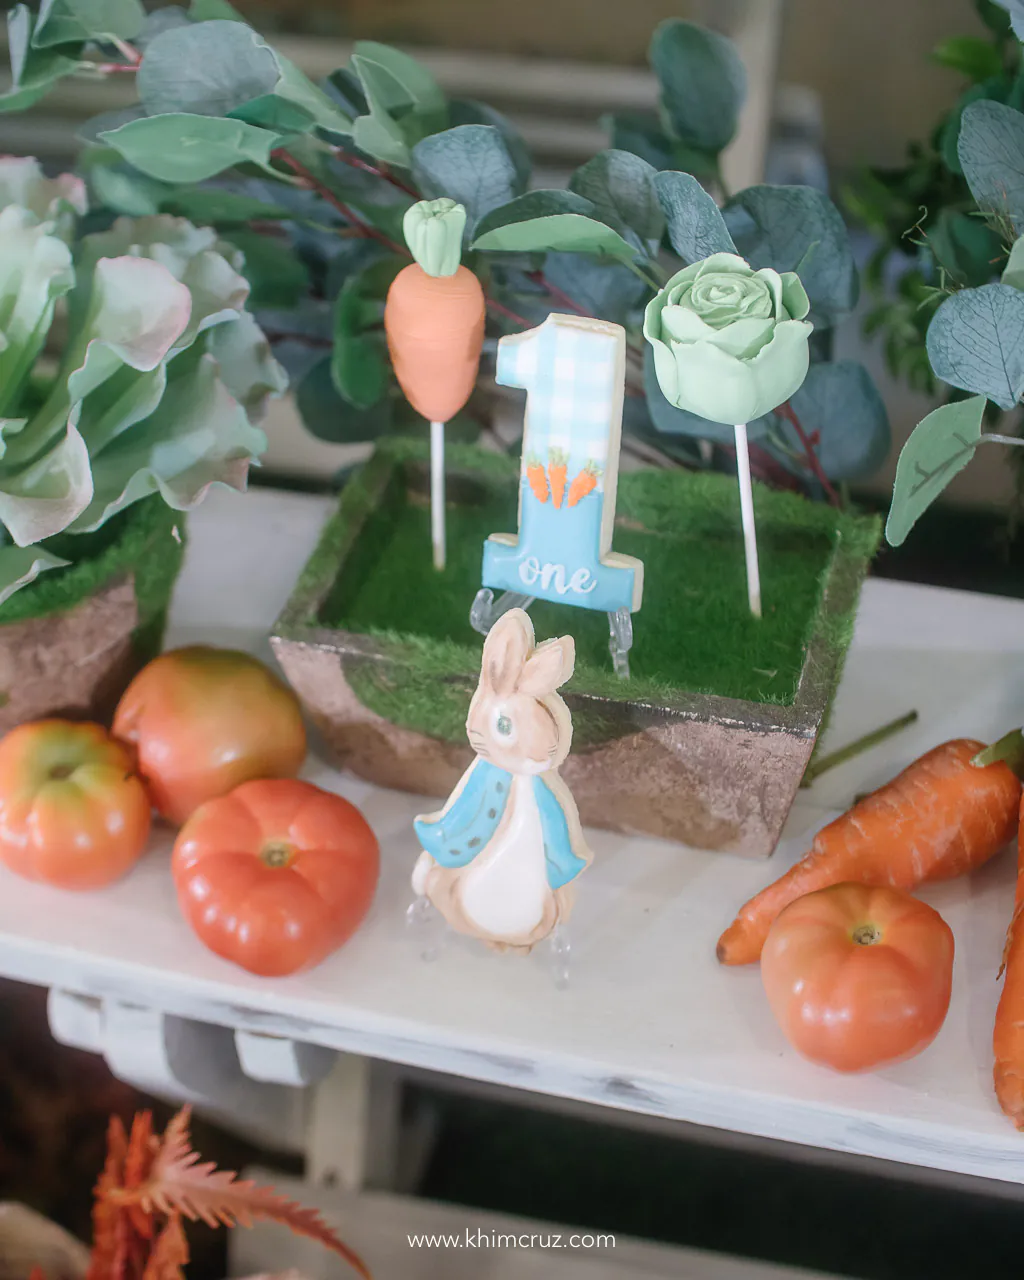 Peter Rabbit cupcakes and desserts with vegetables props